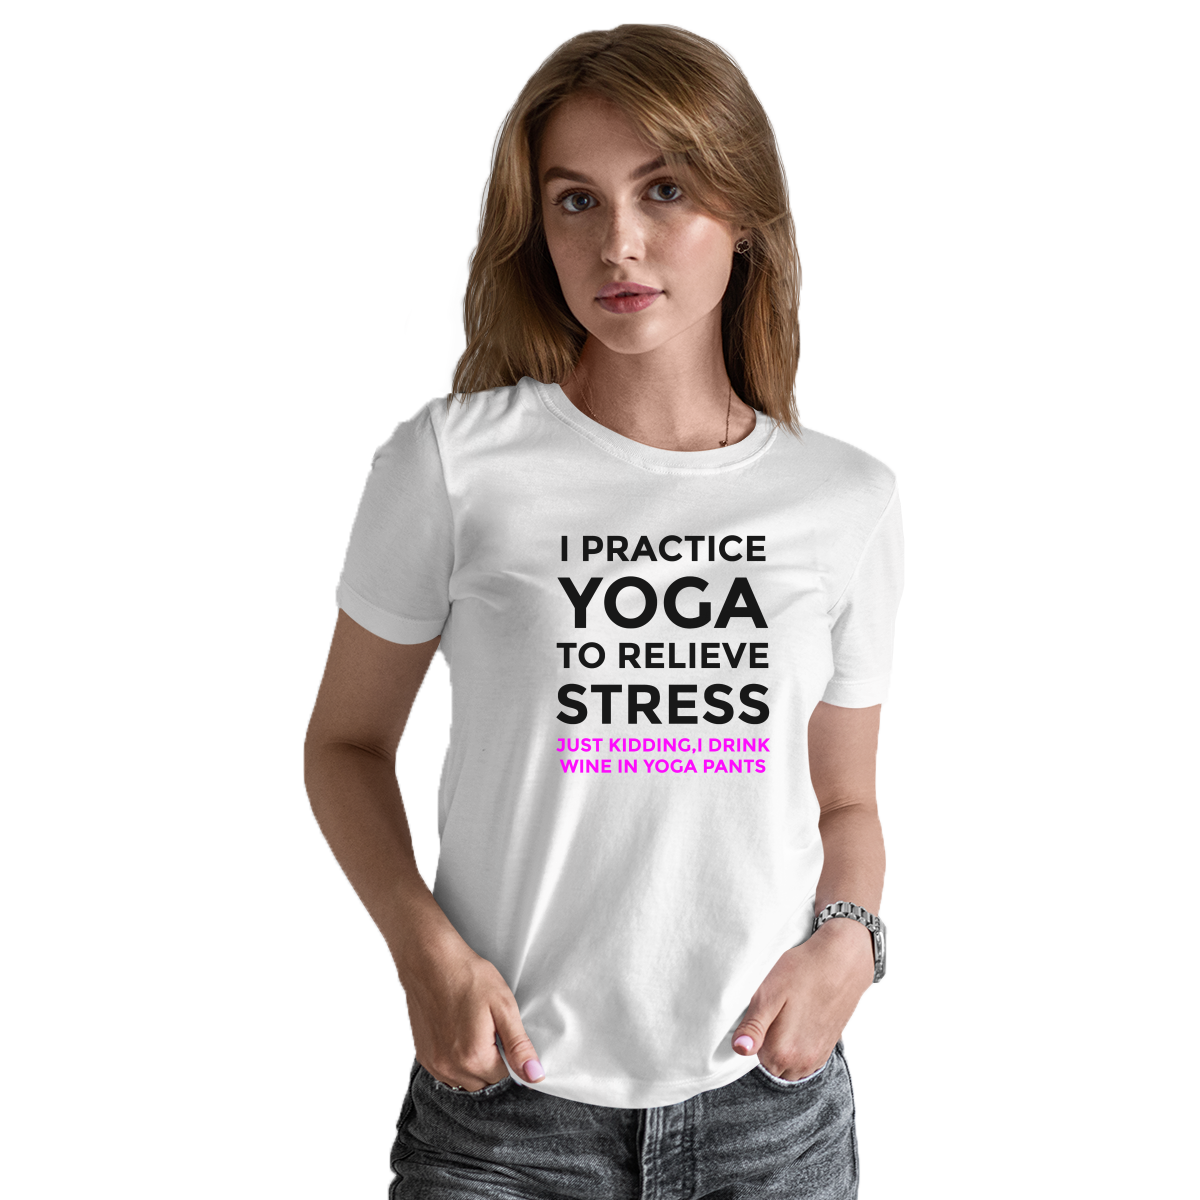 I practice yoga to relieve stress, just kidding I drink wine in yoga pants Women's T-shirt | White